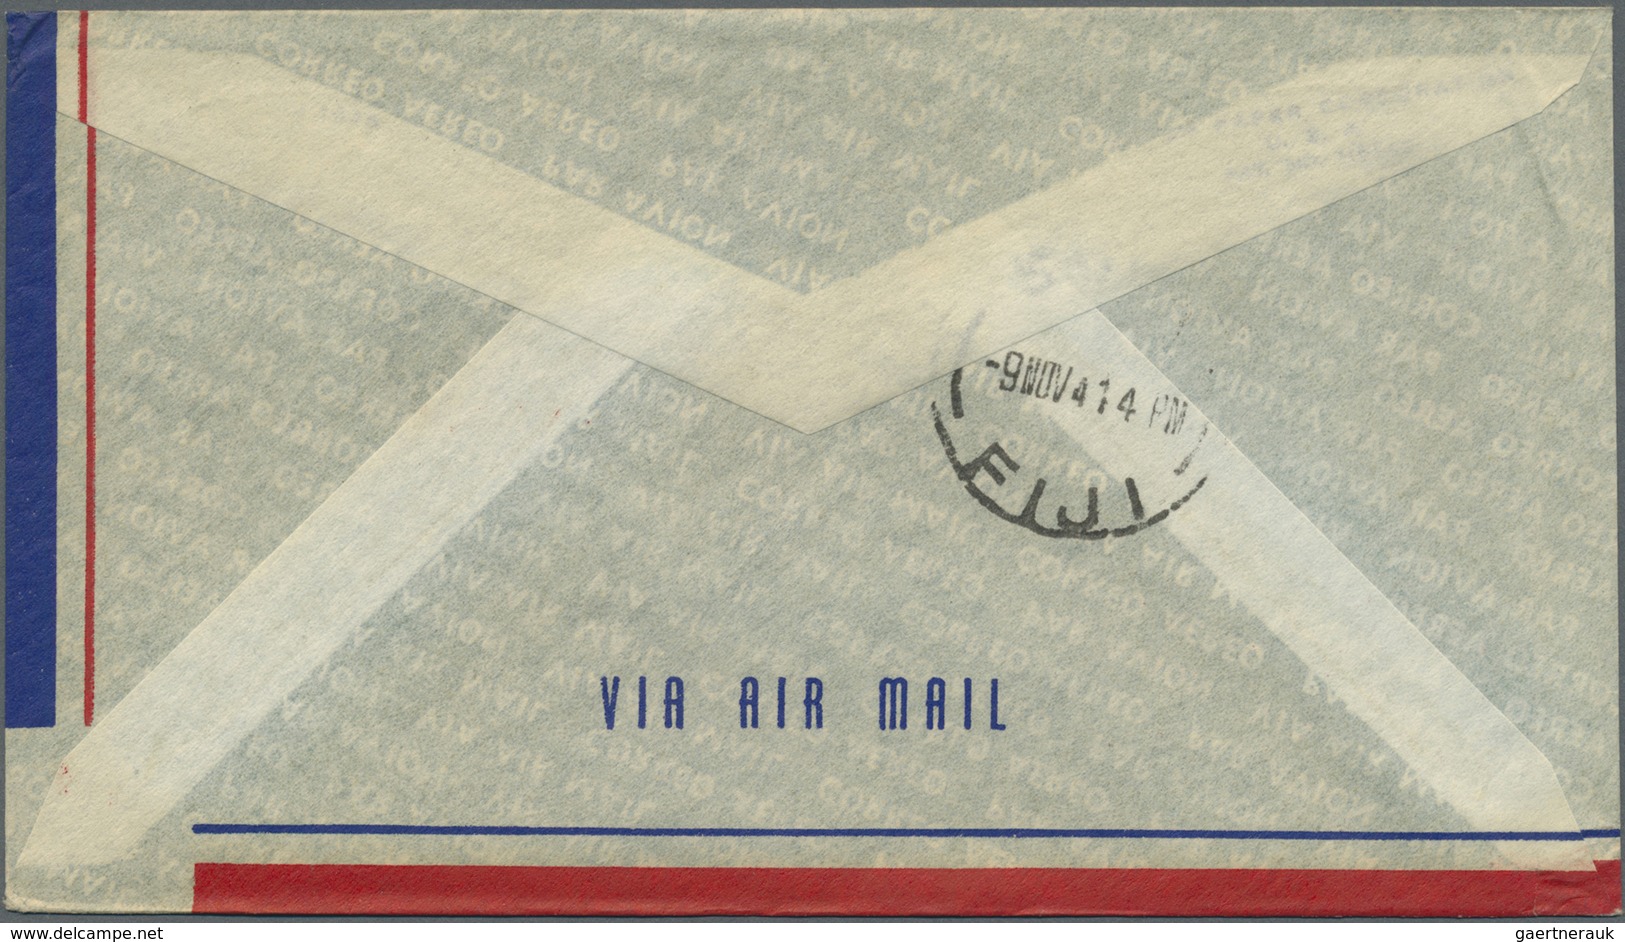 Br Flugpost Übersee: USA: 1941, U.S. Air Mail First Flight to SUVA/Fiji, four covers from Los Angeles,